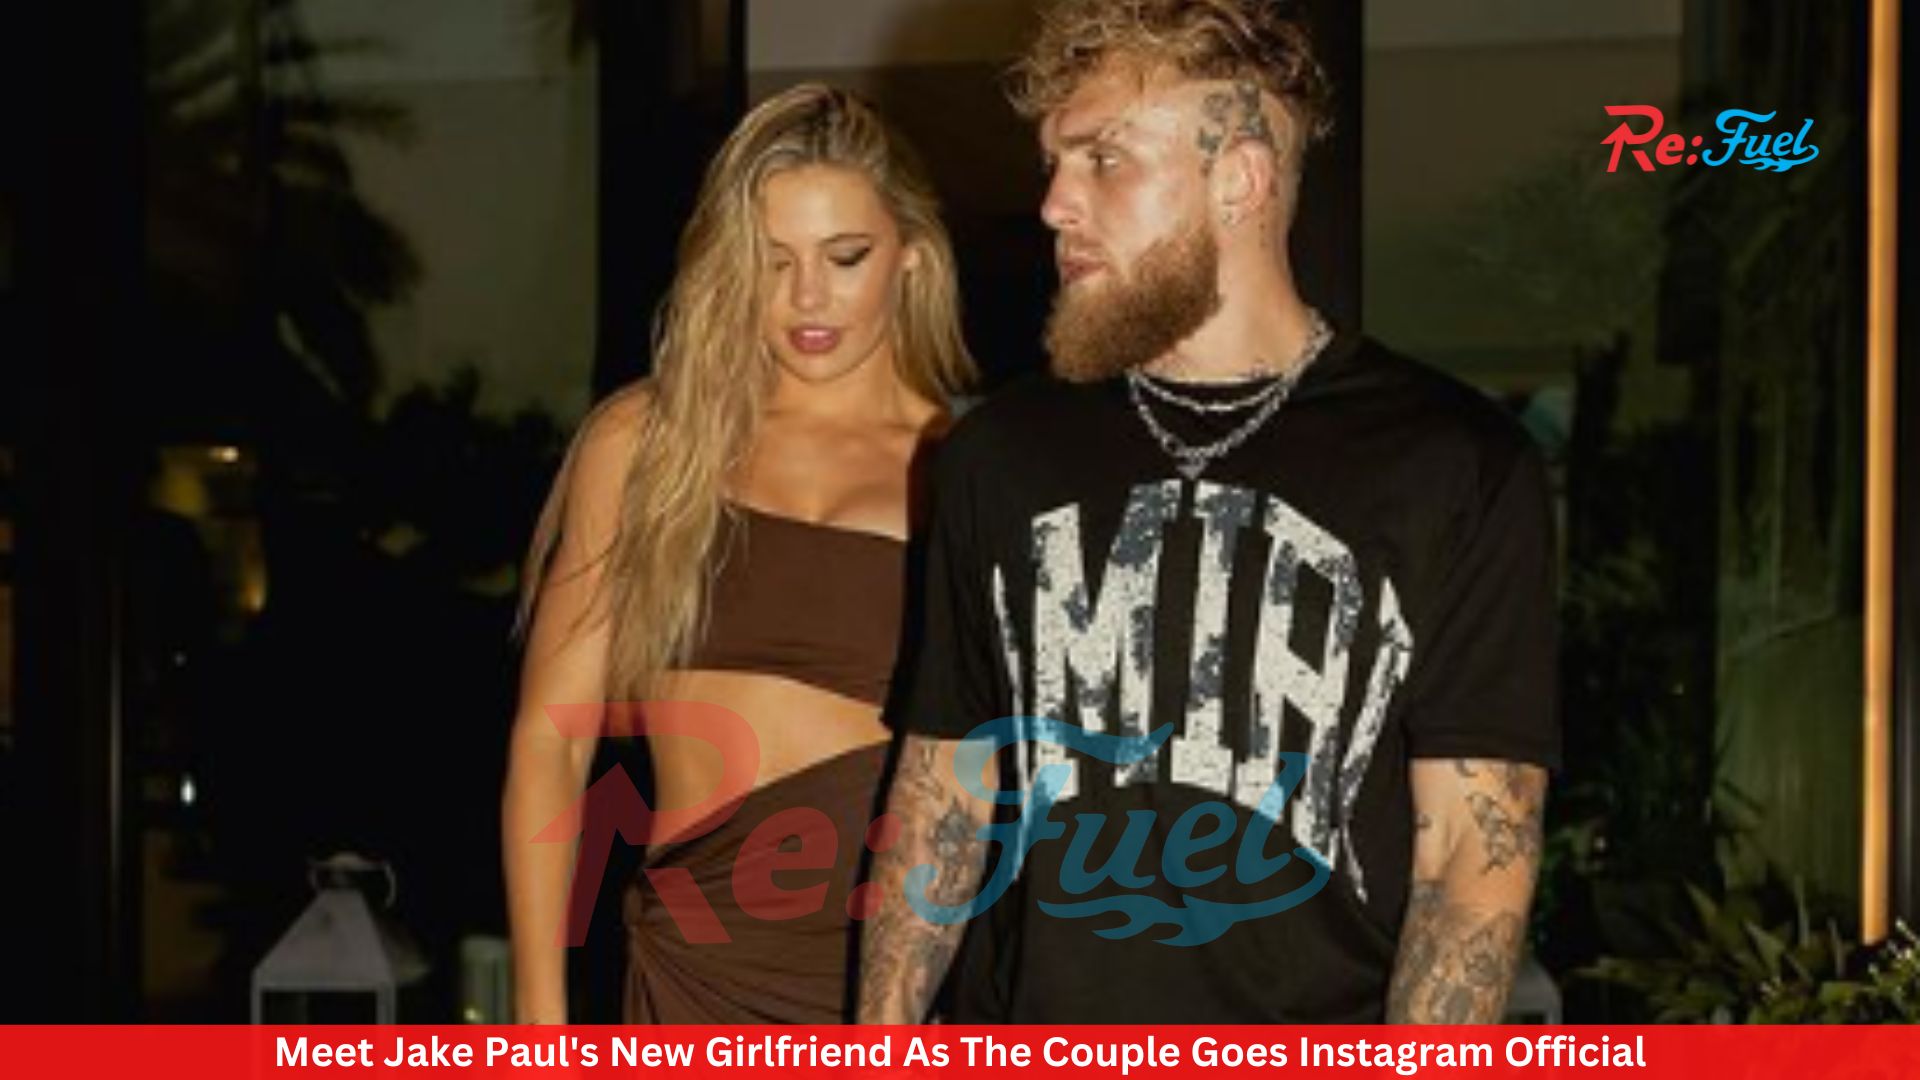 Meet Jake Paul's New Girlfriend As The Couple Goes Instagram Official